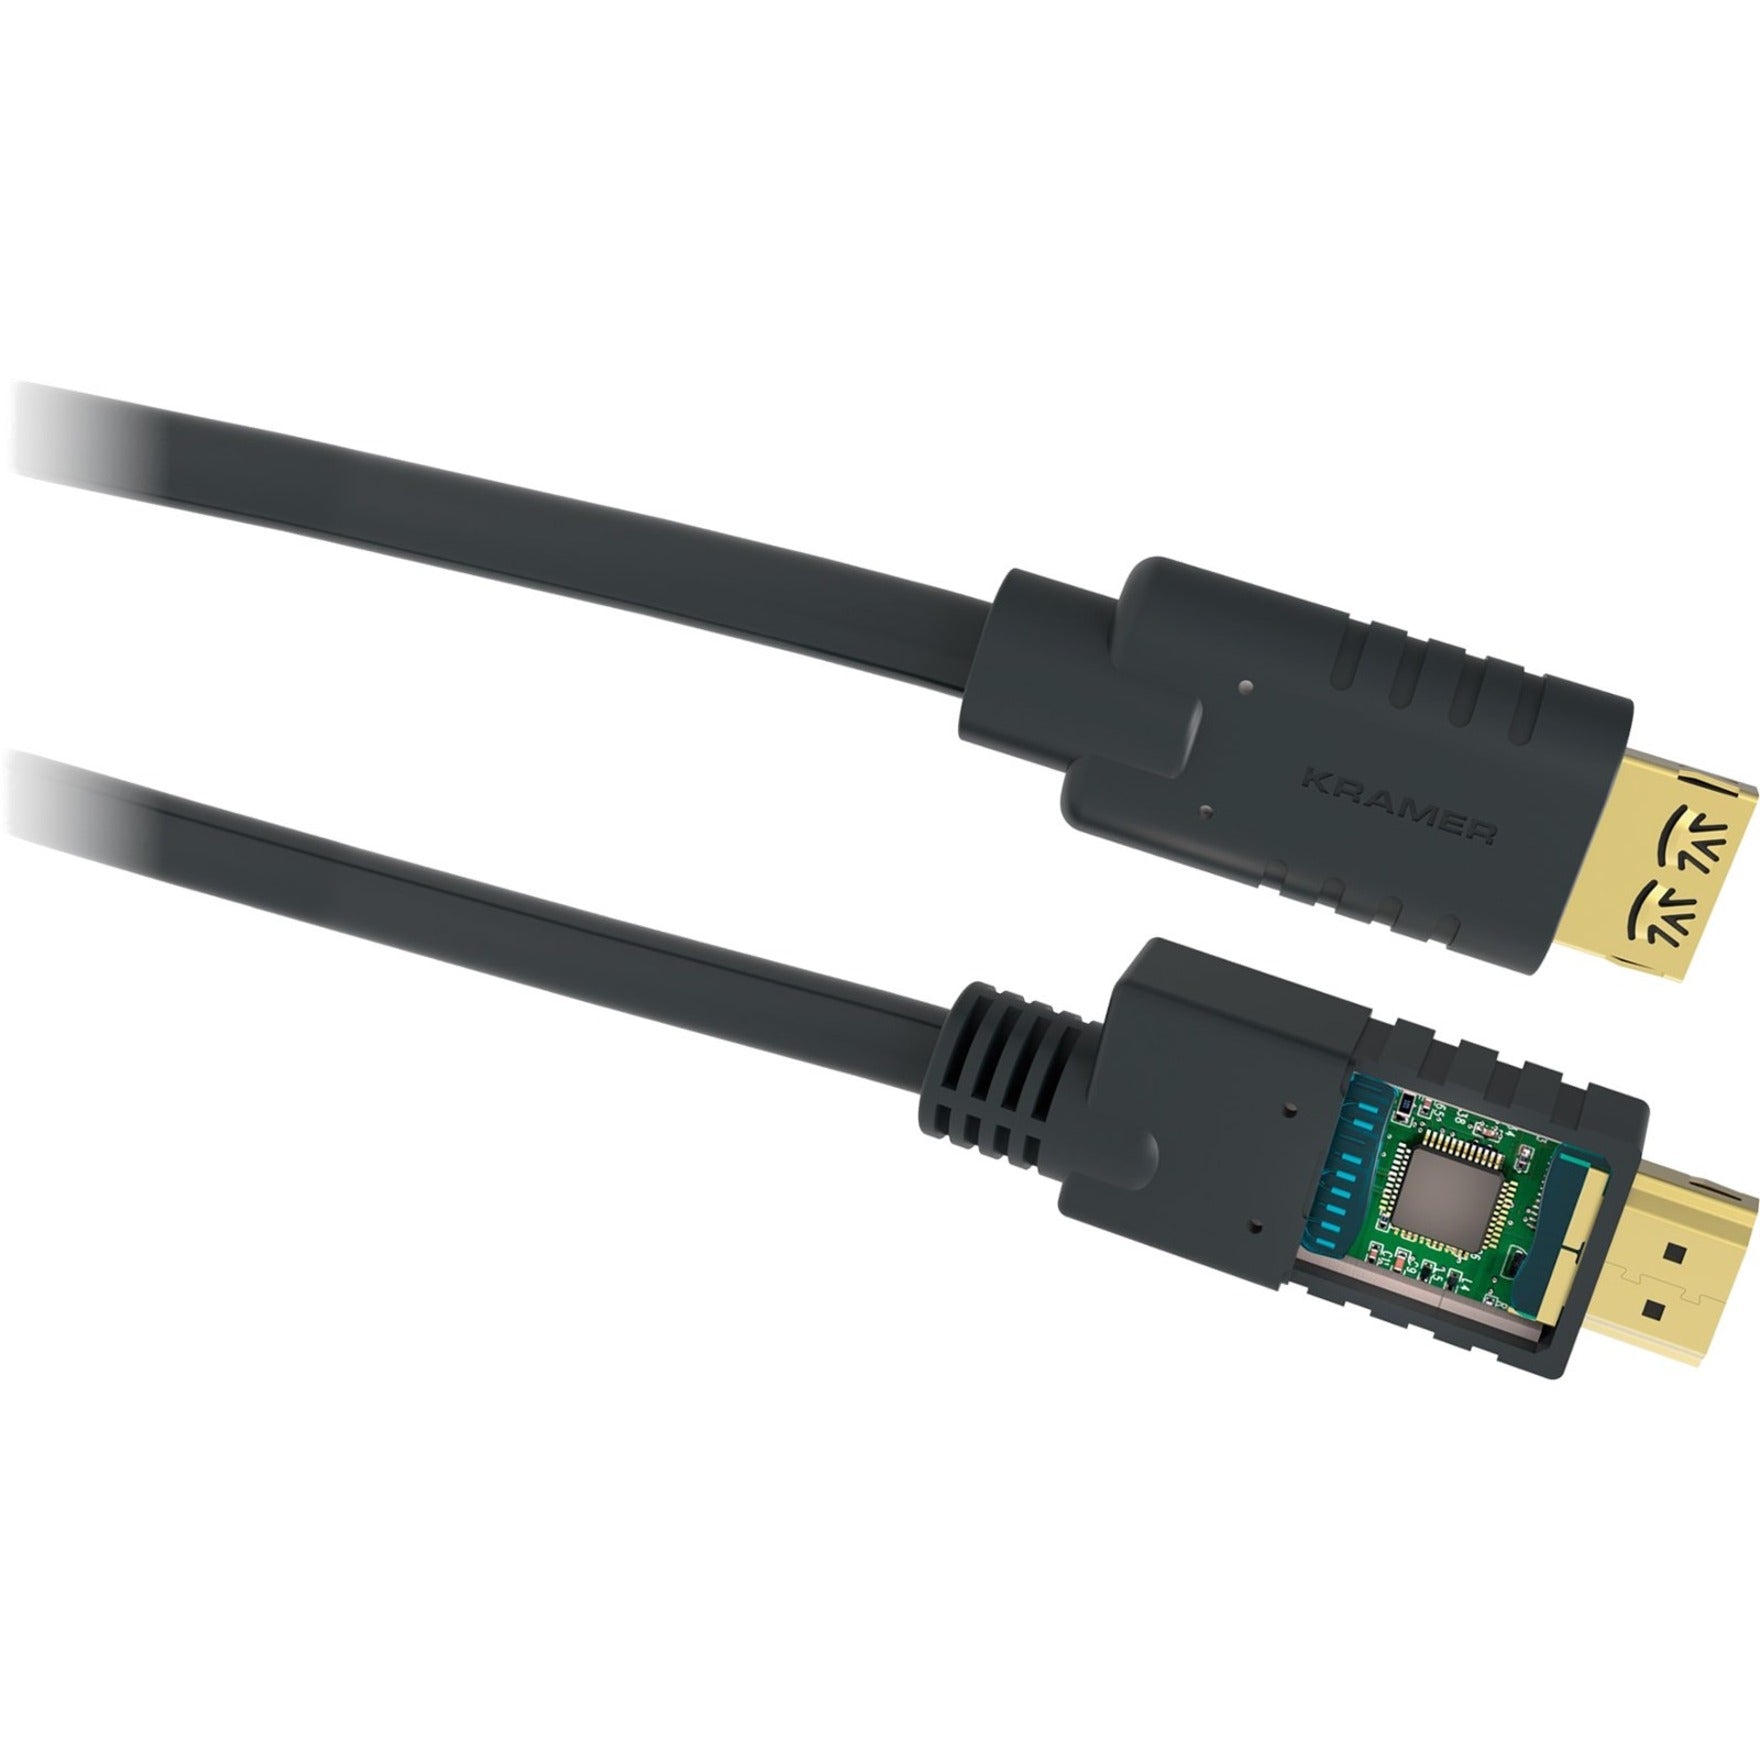 Kramer 97-0142025 Active High Speed HDMI Cable with Ethernet, 24.93 ft, Gold-Plated Connectors, 18 Gbit/s Data Transfer Rate